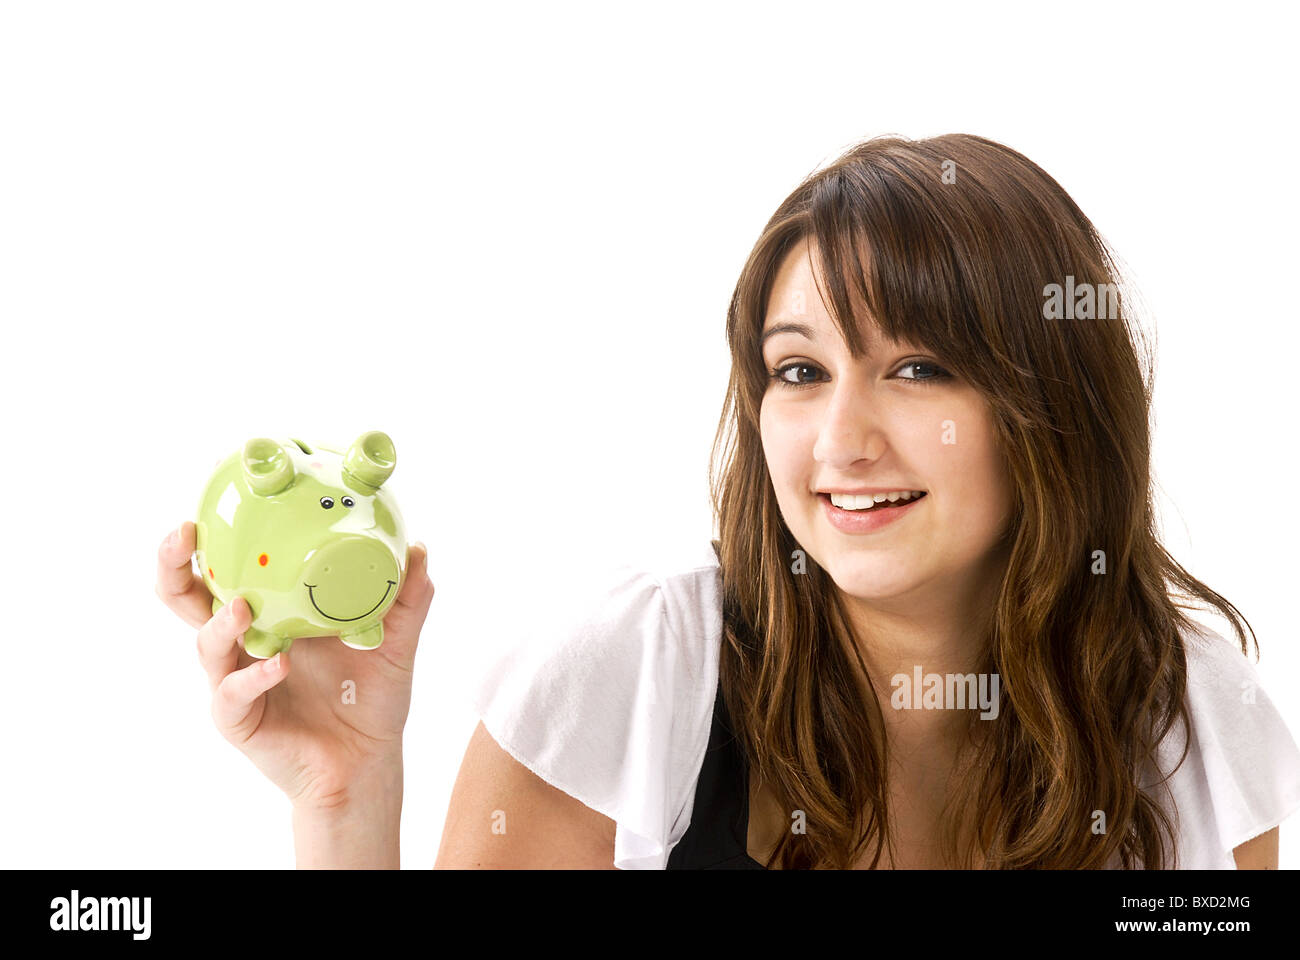 Young woman with piggy bank Stock Photo